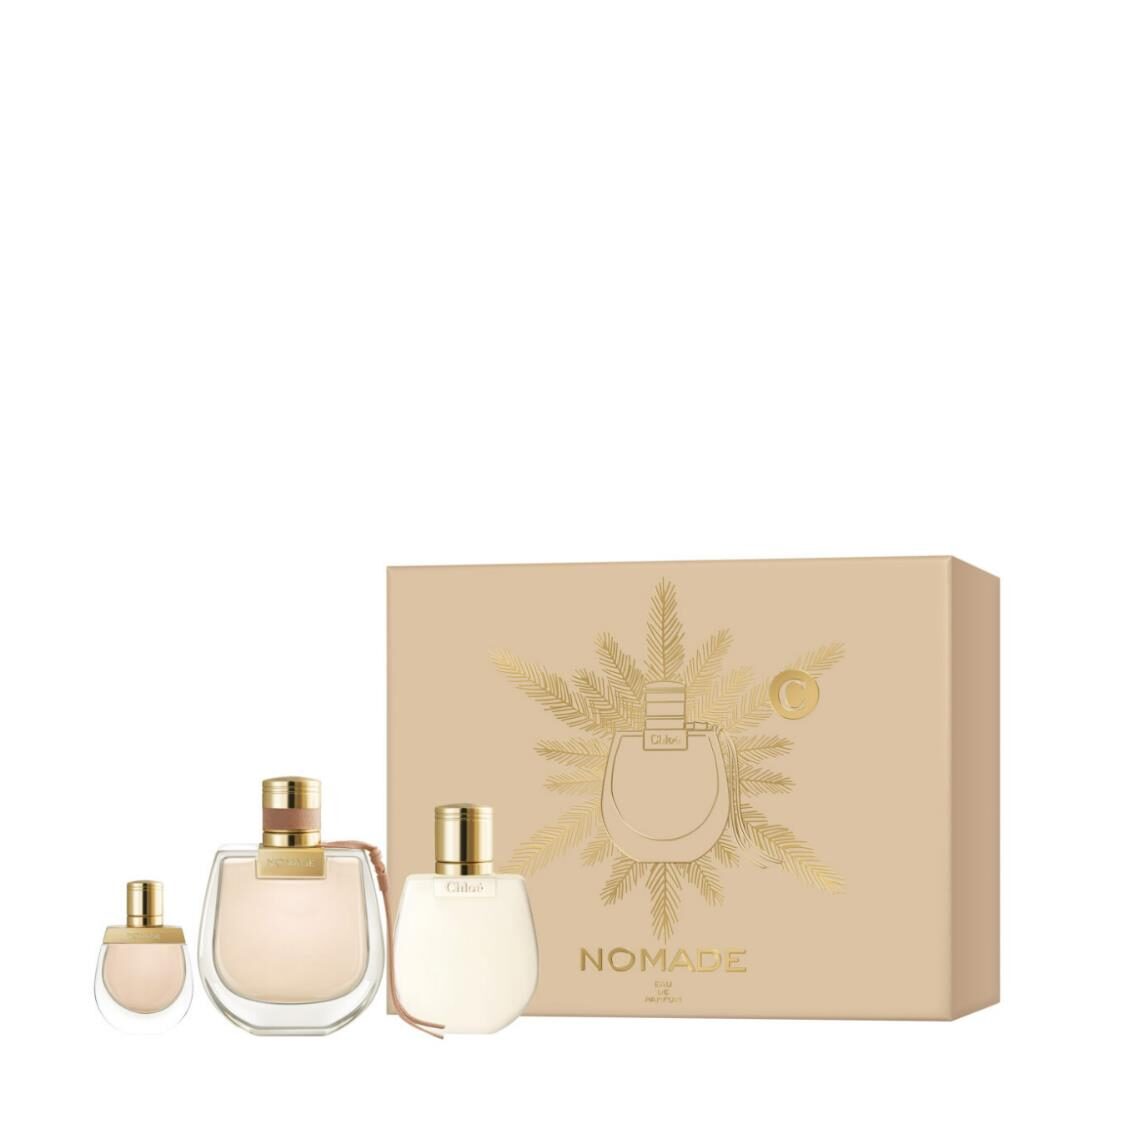 Chlo Nomade Eau de Parfum 75ml Gift Set with Miniature and Body Lotion 100ml